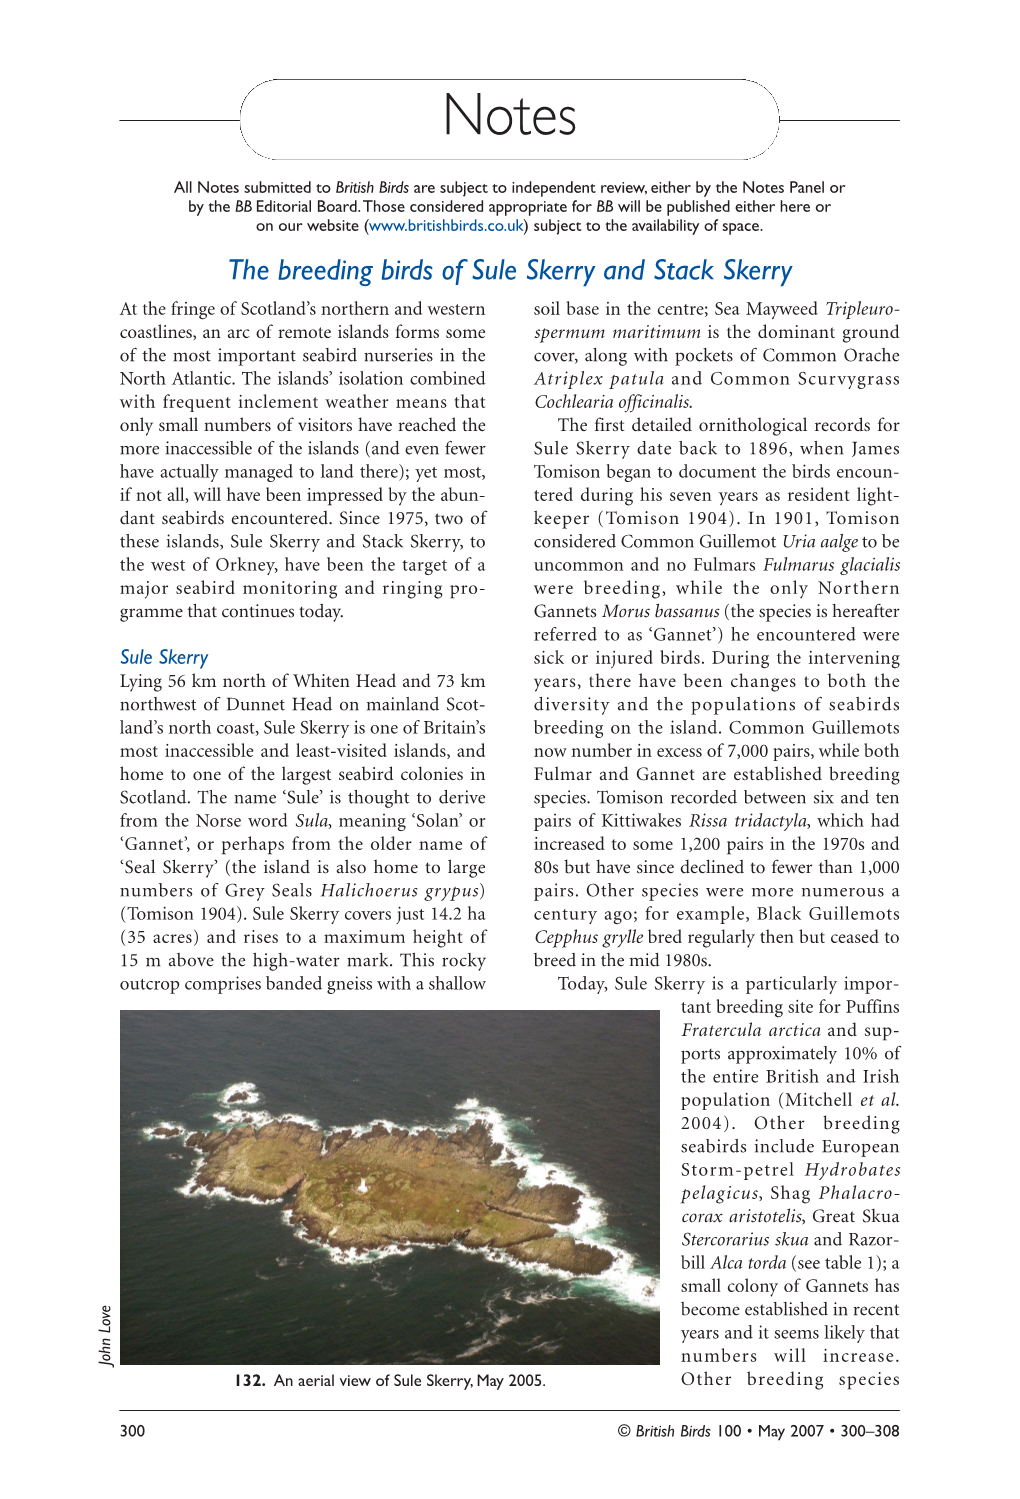 The Breeding Birds of Sule Skerry and Stack Skerry